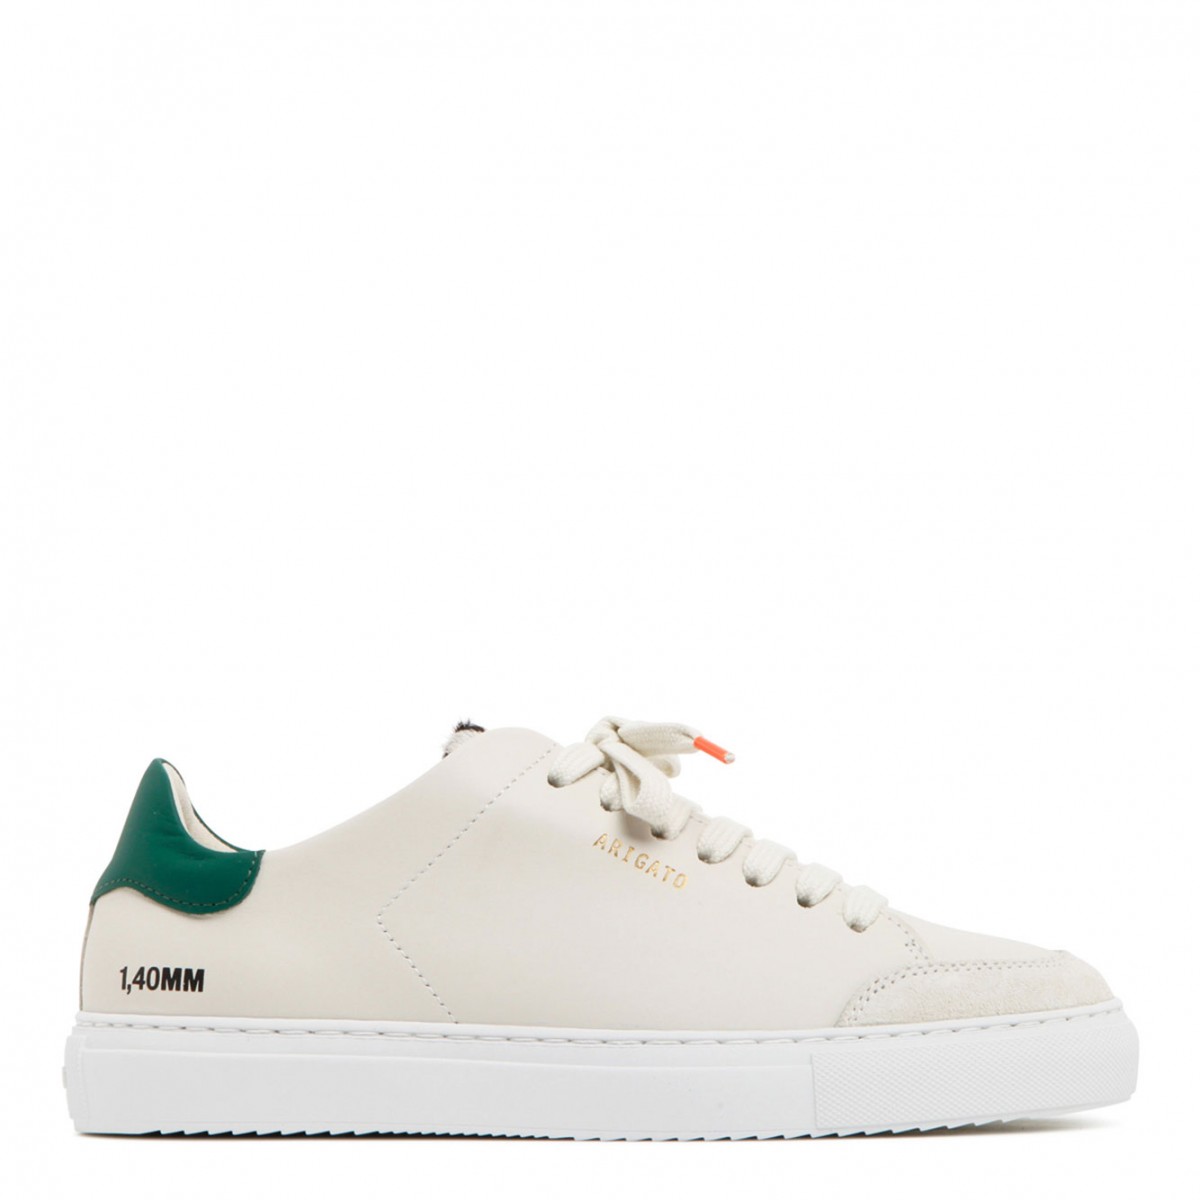 Axel Arigato Cream and Green Leather Clean Sneakers.